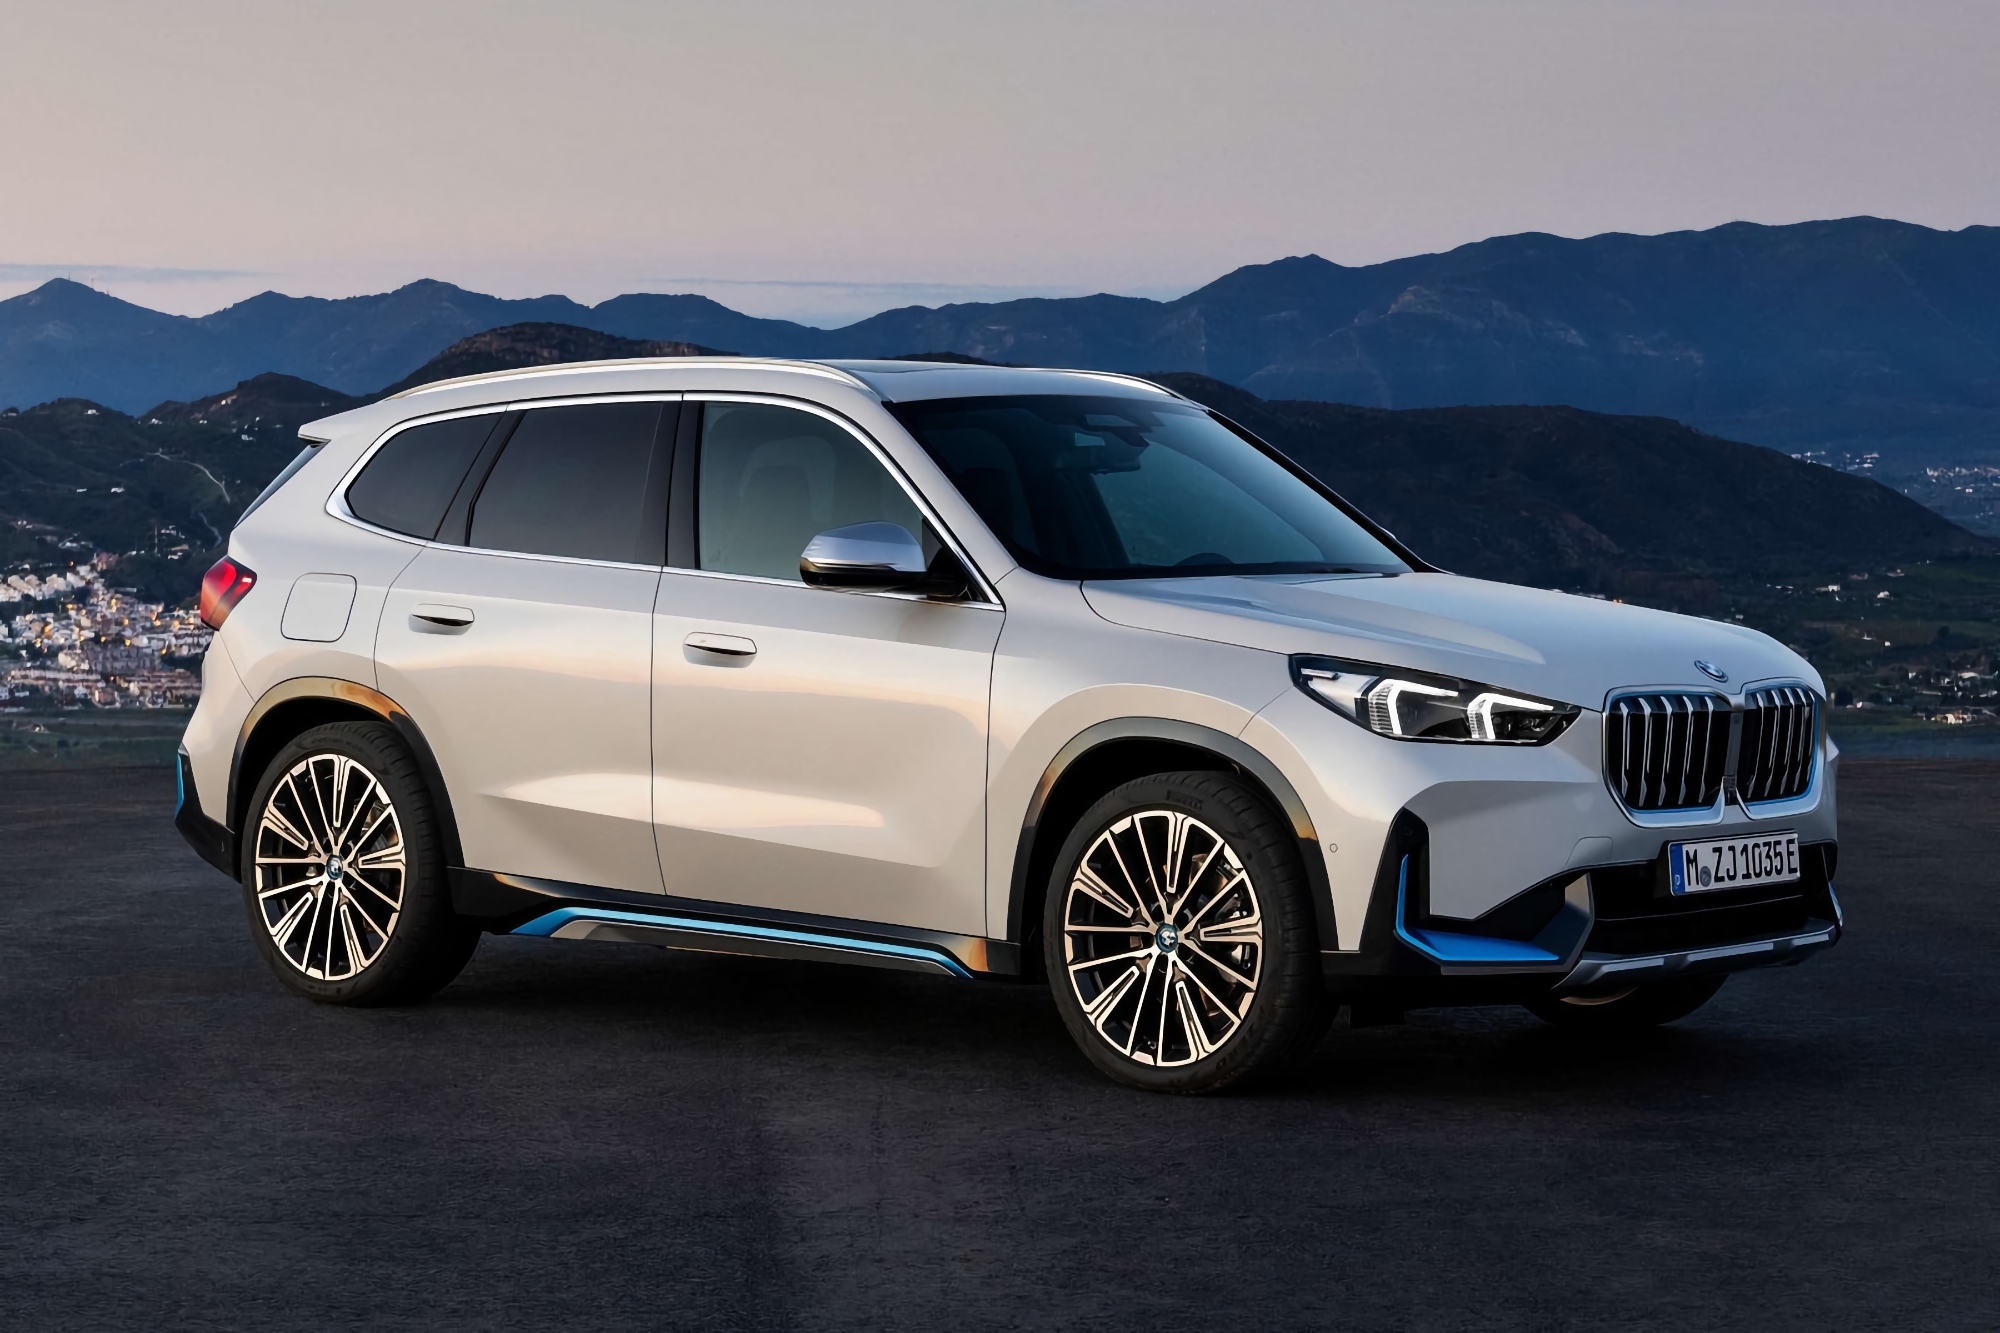 BMW iX1: all-wheel drive electric crossover with a range of 438 km